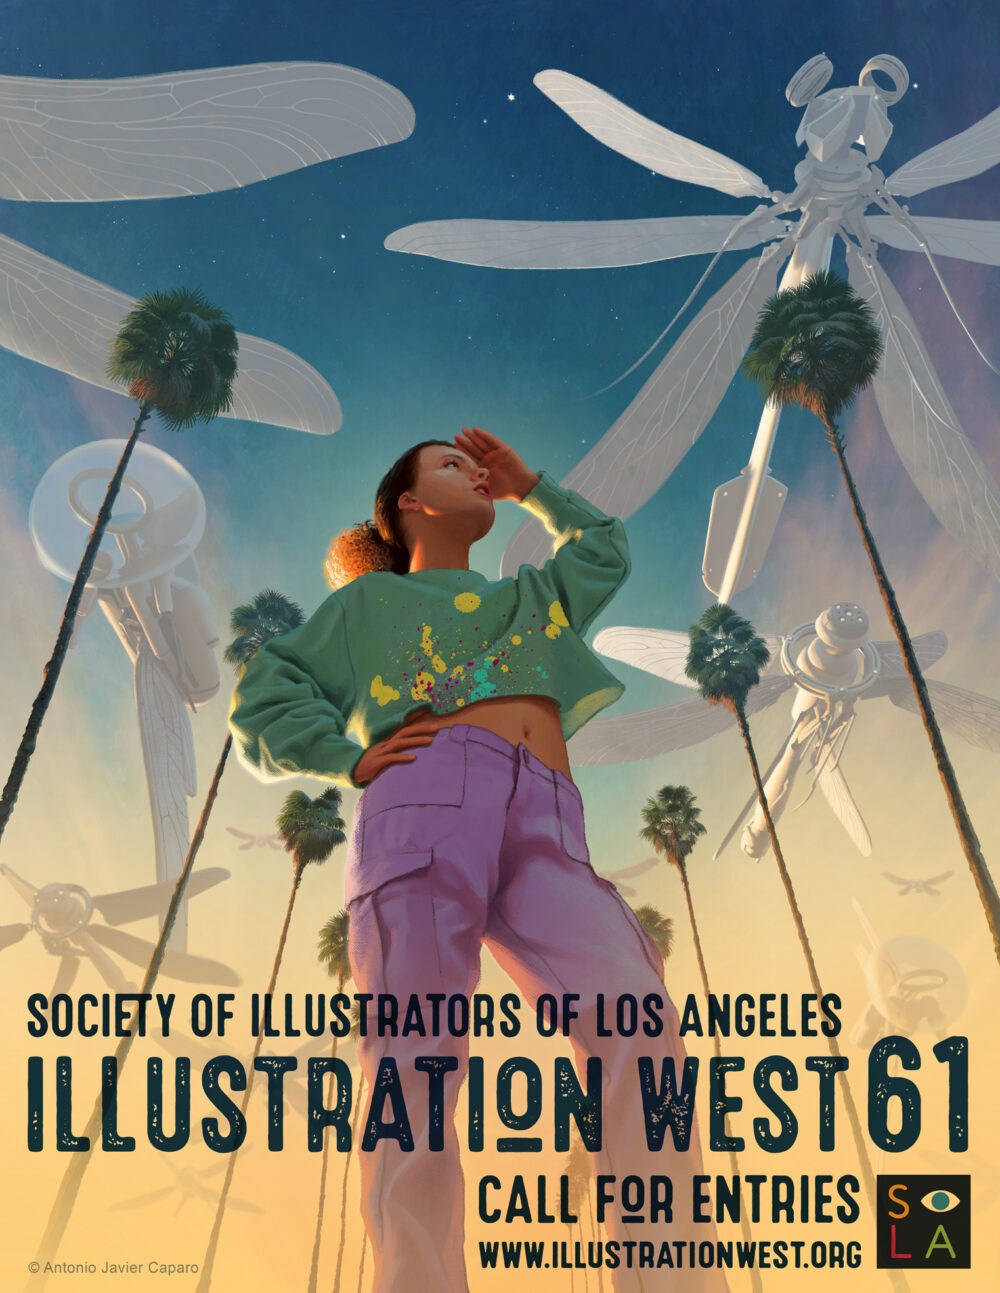 Interview for Illustration West 61